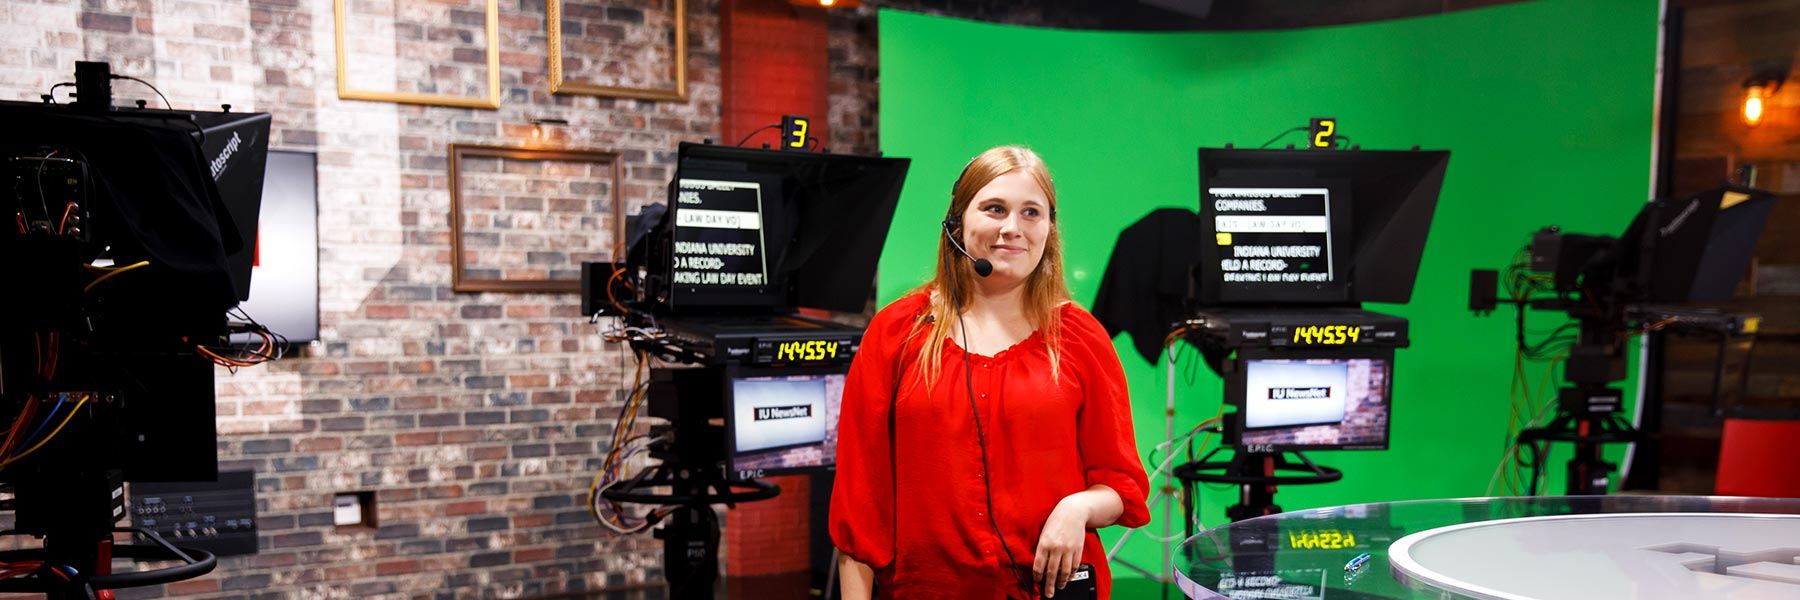 A student with a headset on stands in front of a set of teleprompters in a TV studio.